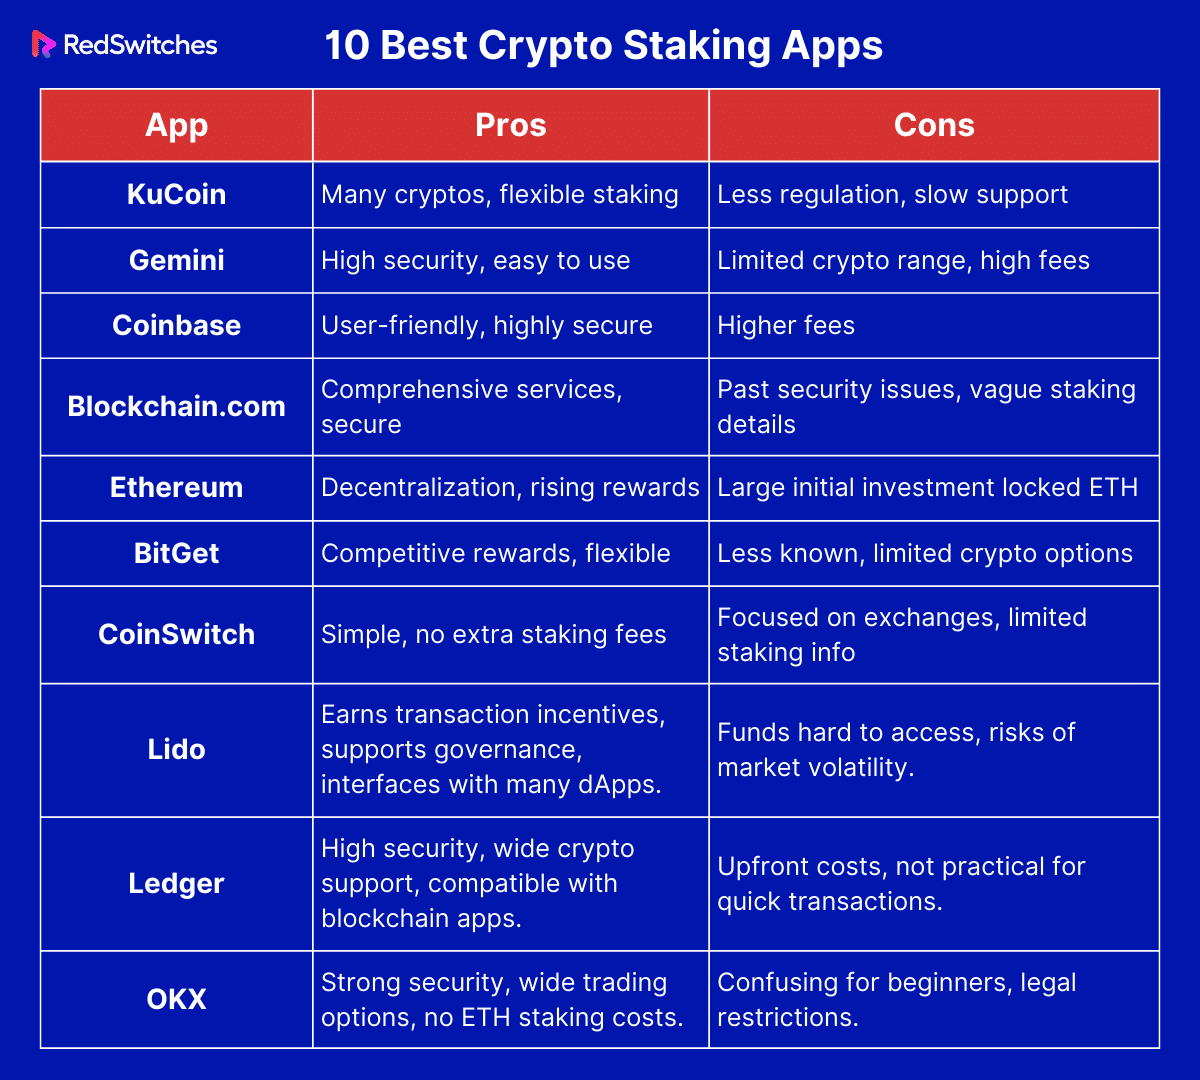 10 Best Crypto Staking Apps